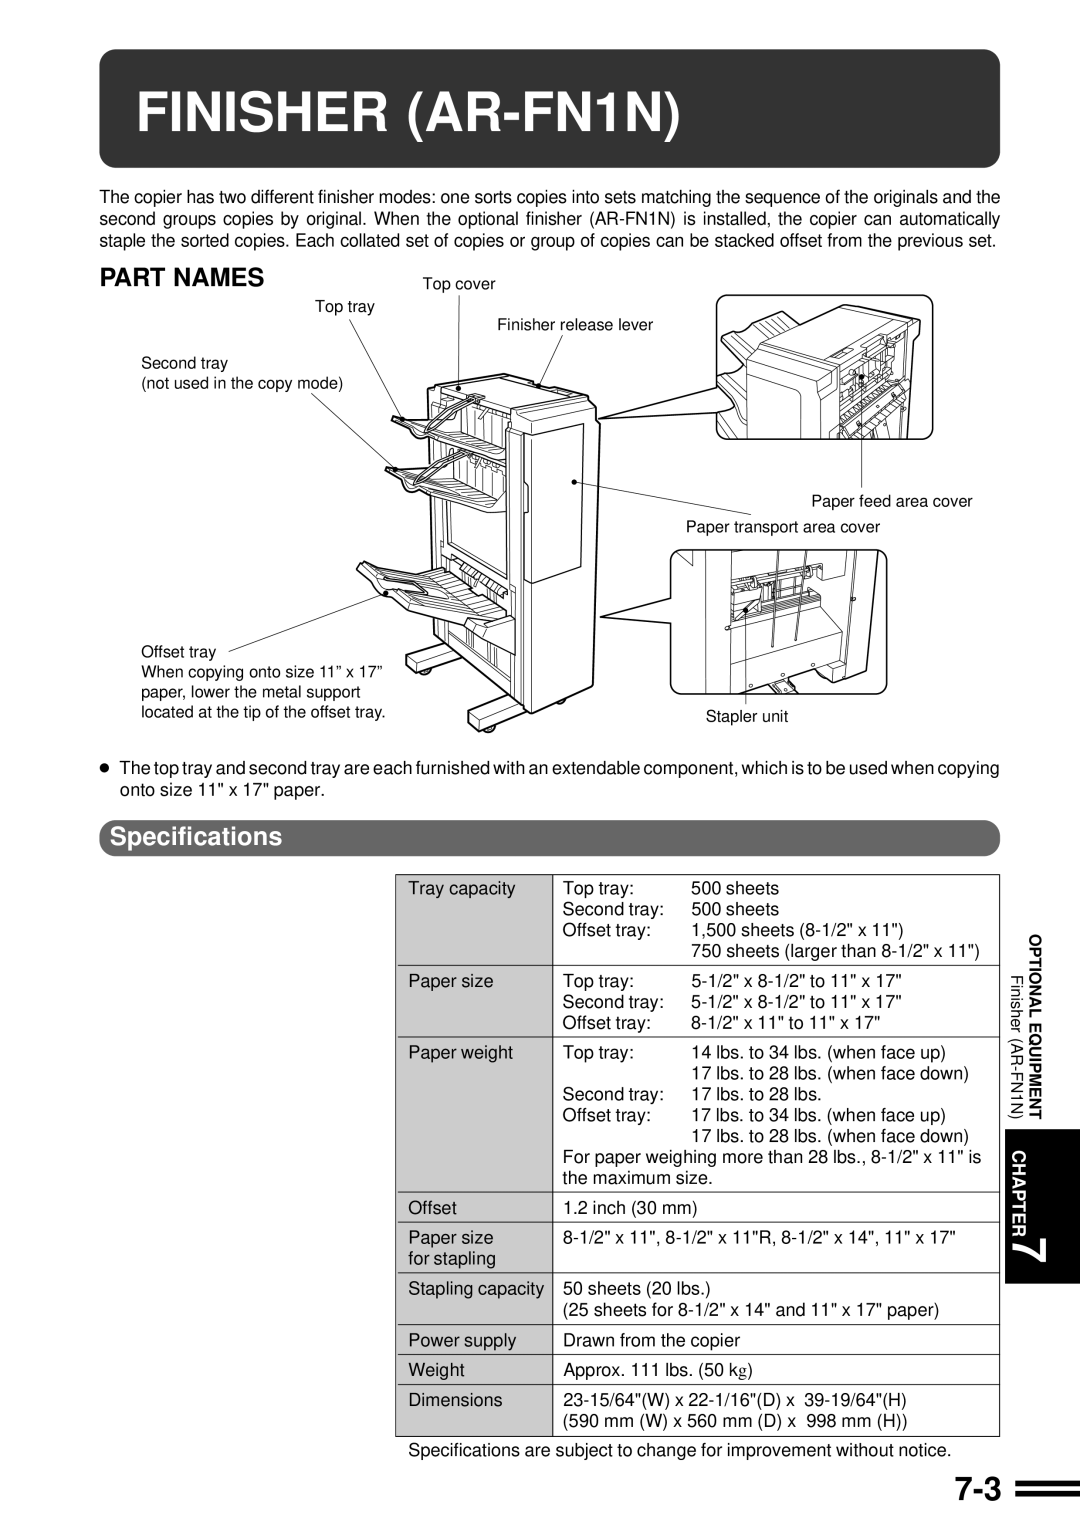 Sharp AR-287 manual FINISHER AR-FN1N, Specifications 